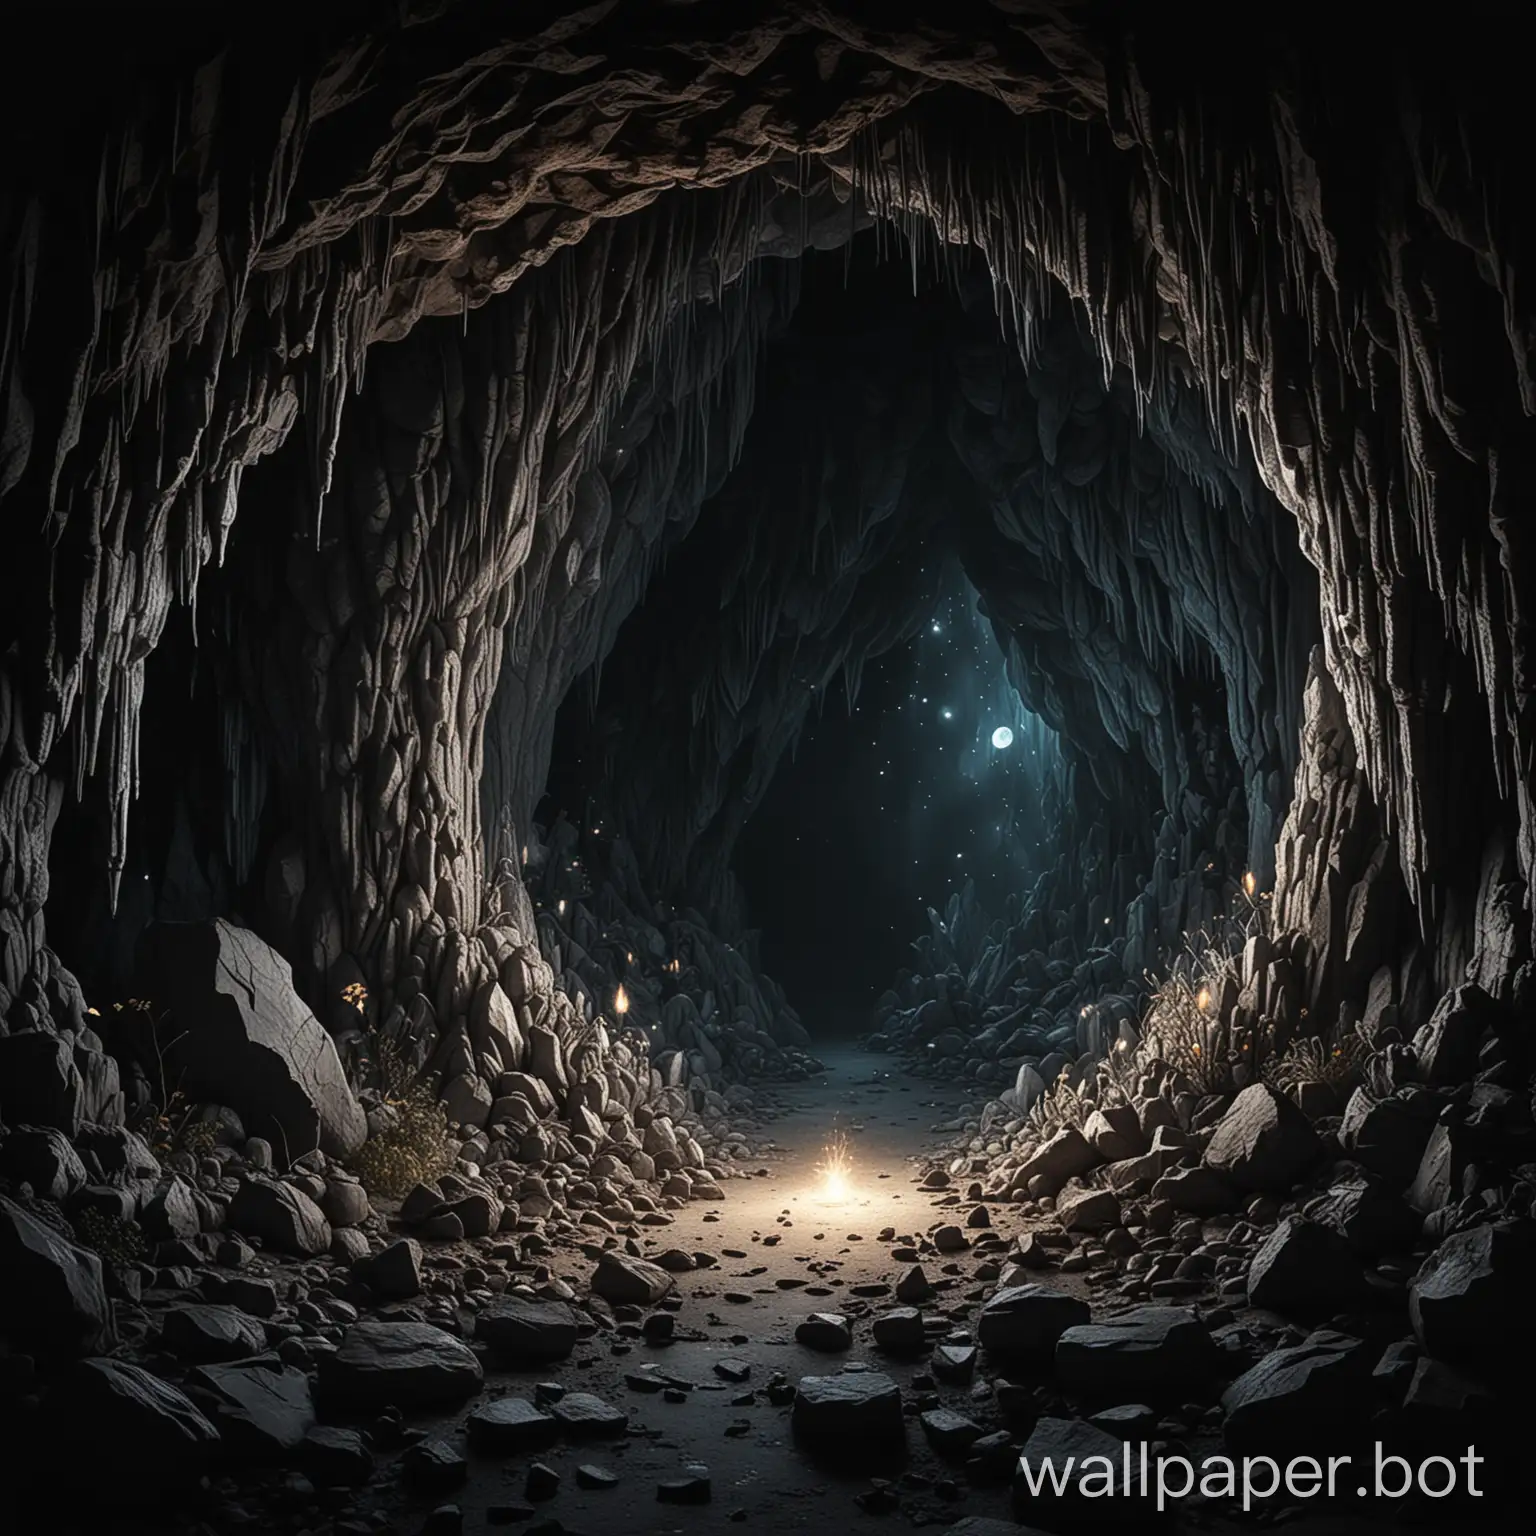 draw a fantasy magical cave on a black background